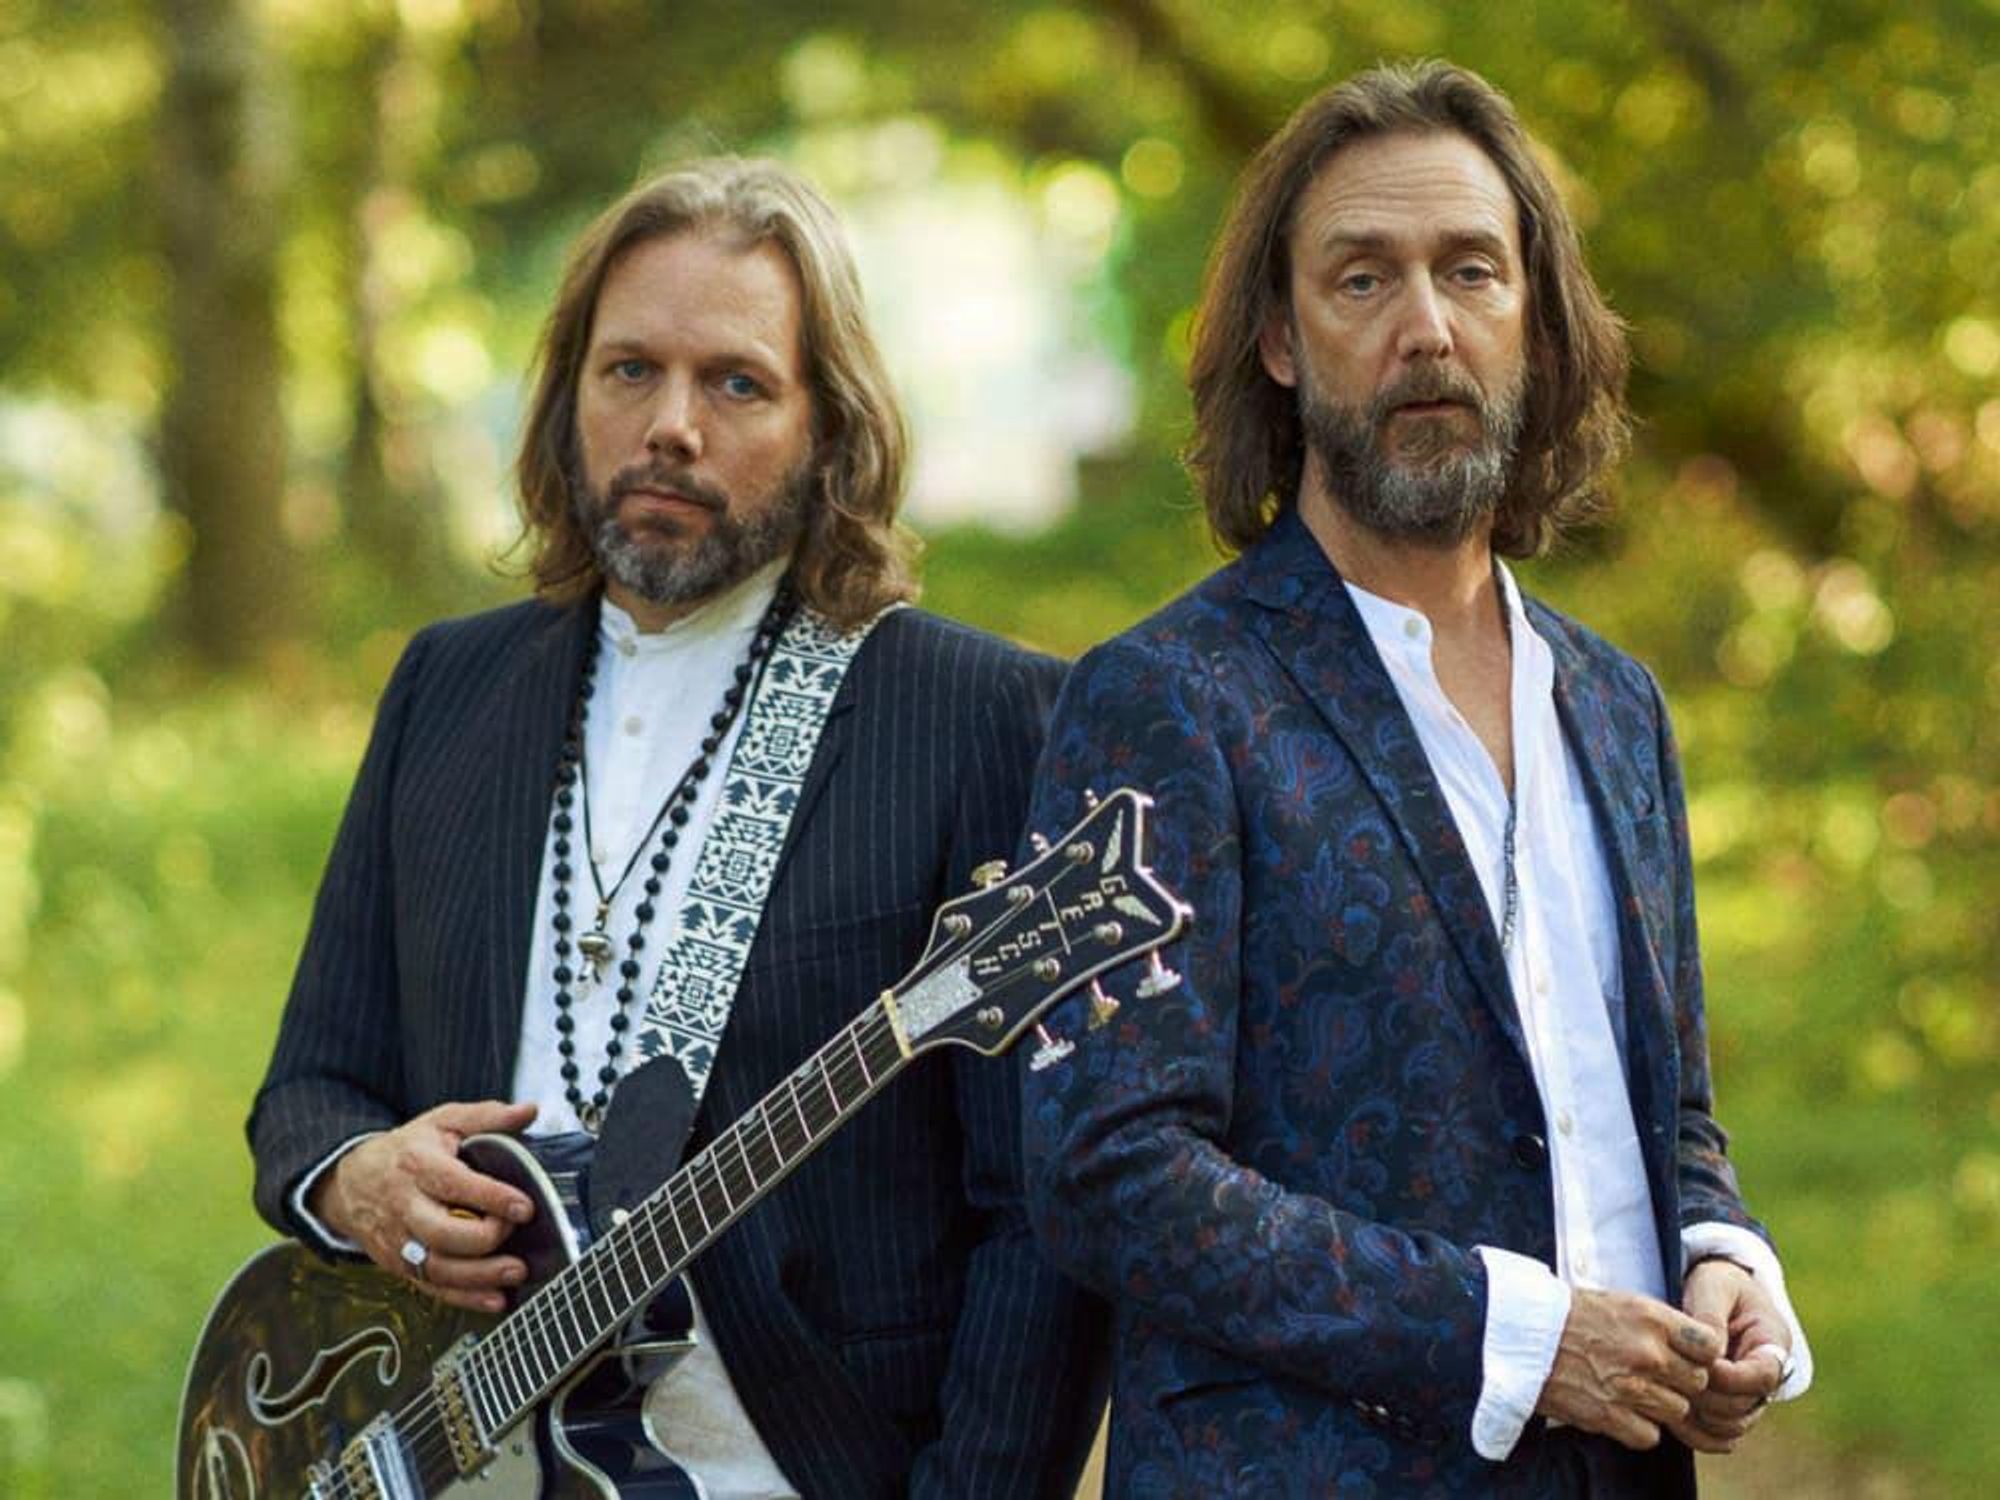 Rich and Chris Robinson of The Black Crowes